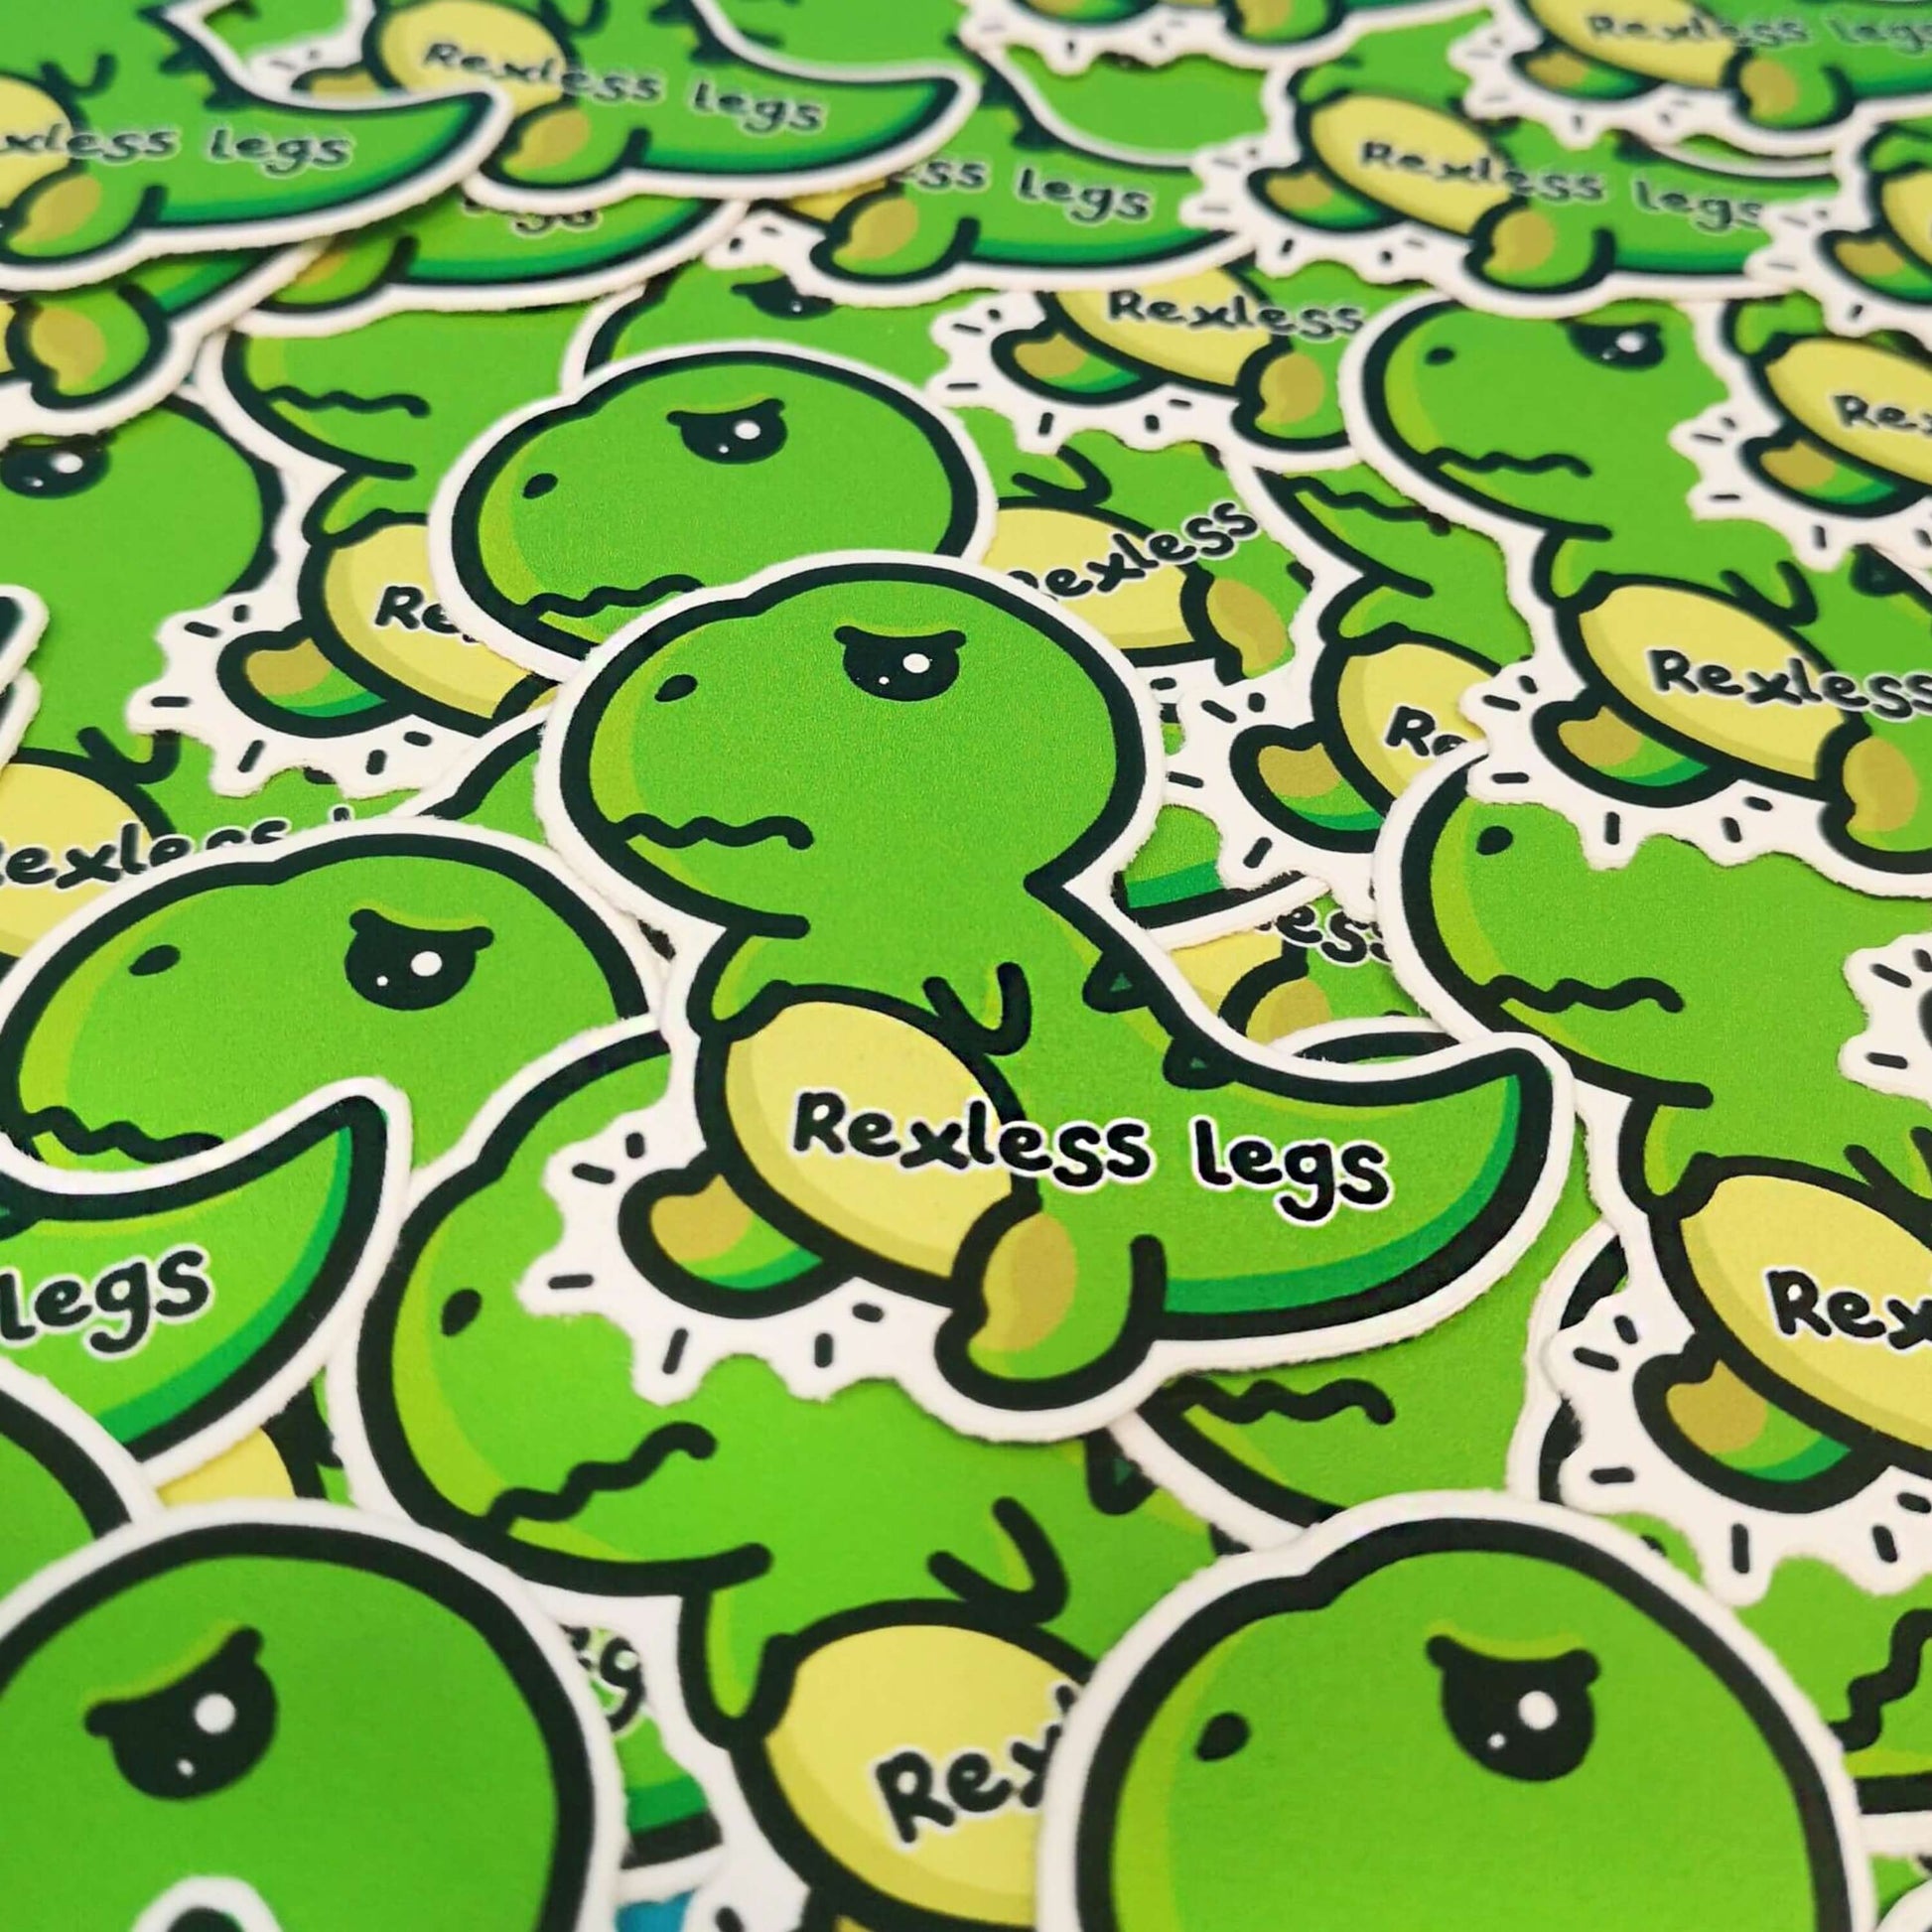 The Rexless Legs Sticker - Restless Legs Syndrome on a pile of the same copy of the sticker. The green, grumpy upset t-rex dinosaur sticker has yellow lower legs with black text across its body reading 'rexless legs'. The hand drawn design is raising awareness for restless legs syndrome.